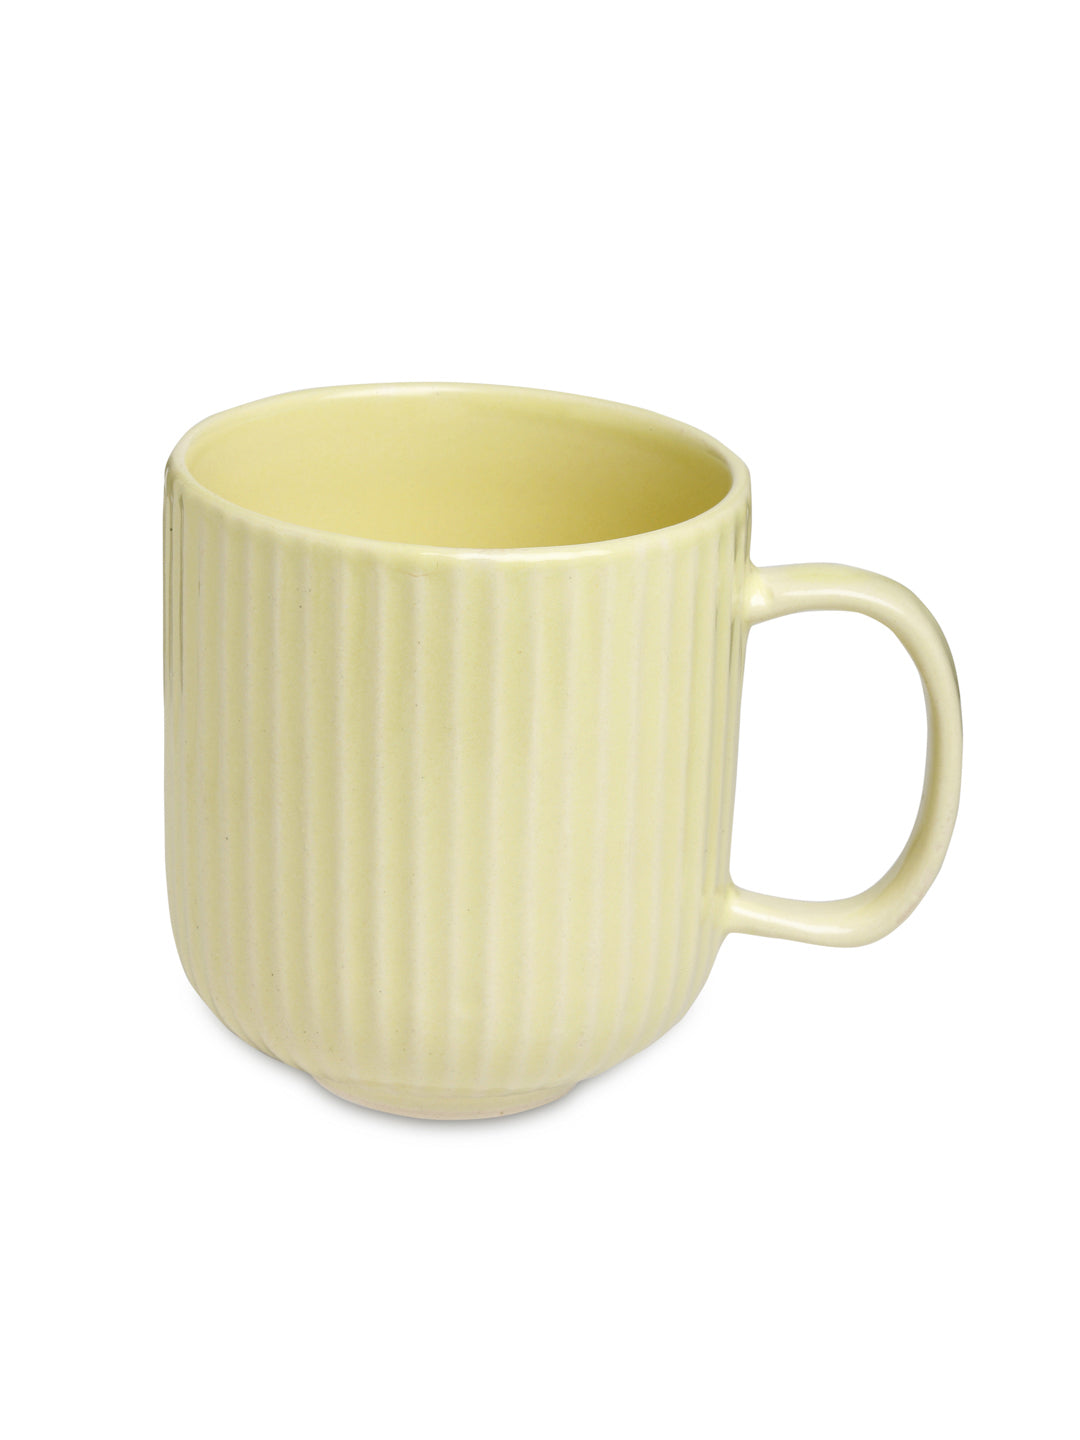 Stripped Set of 2 Ceramic Mugs With Tray